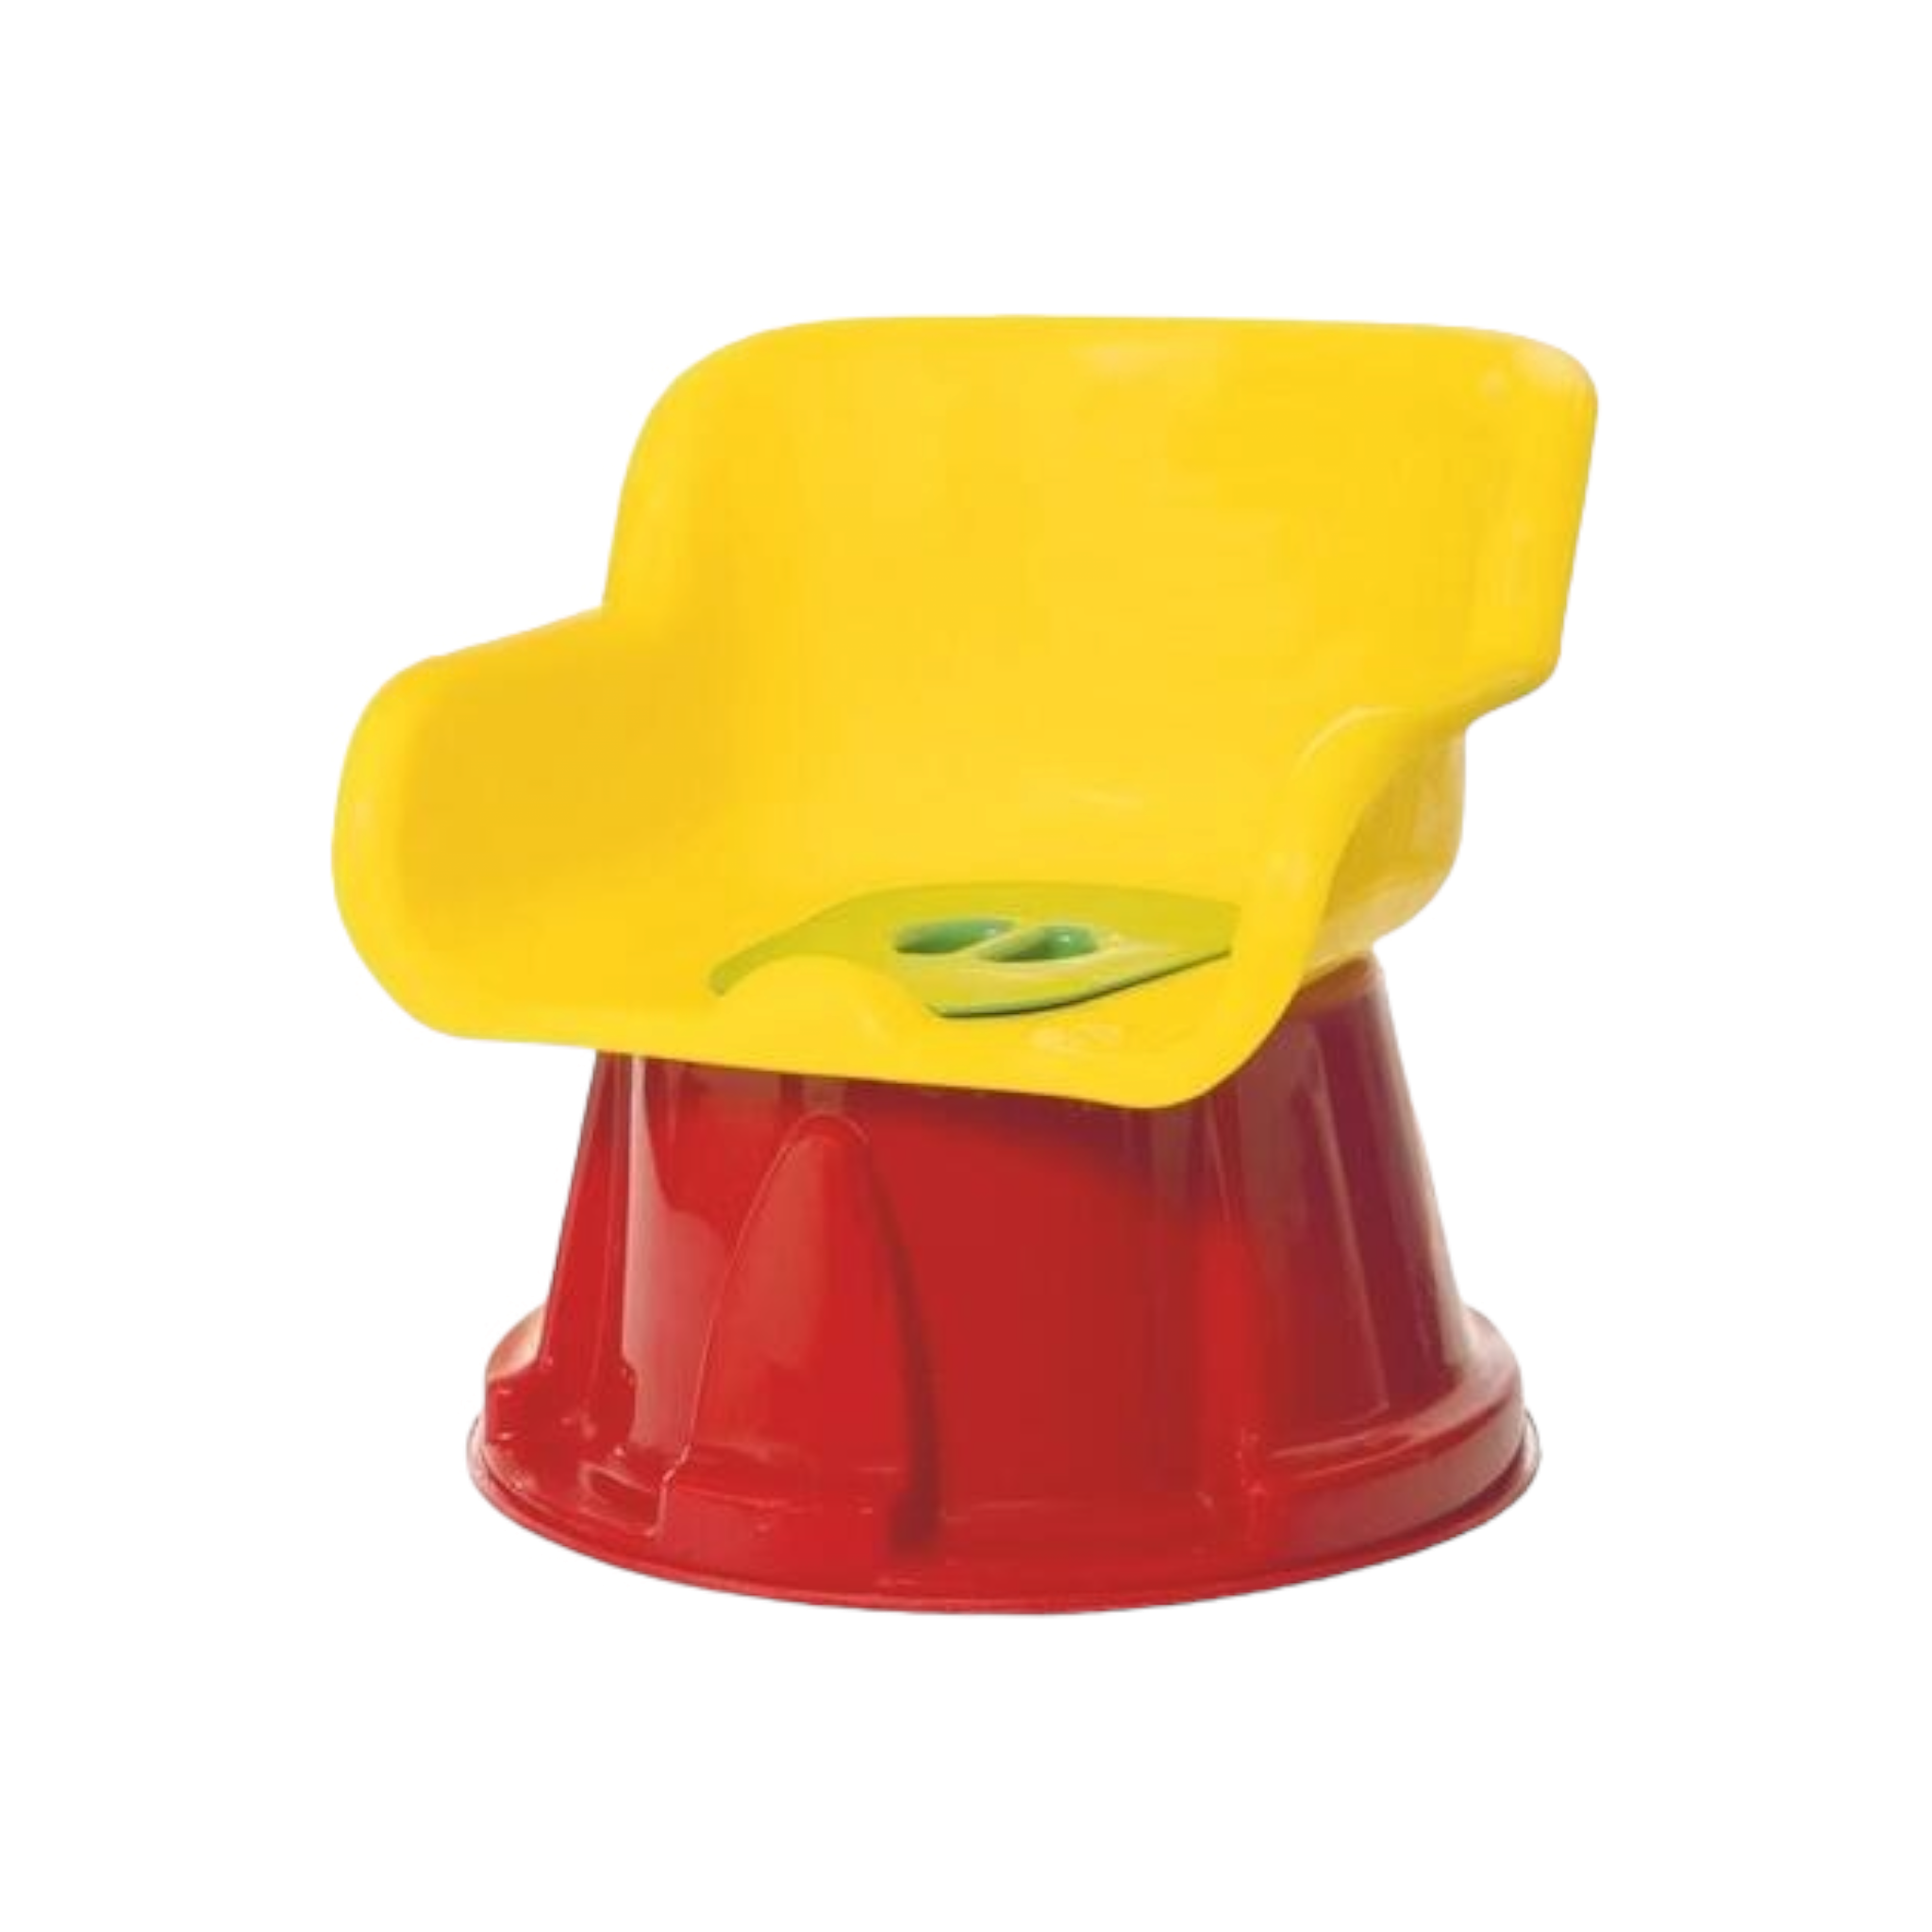 Plastic Potty Chair 2-in-1 Tots Trainer